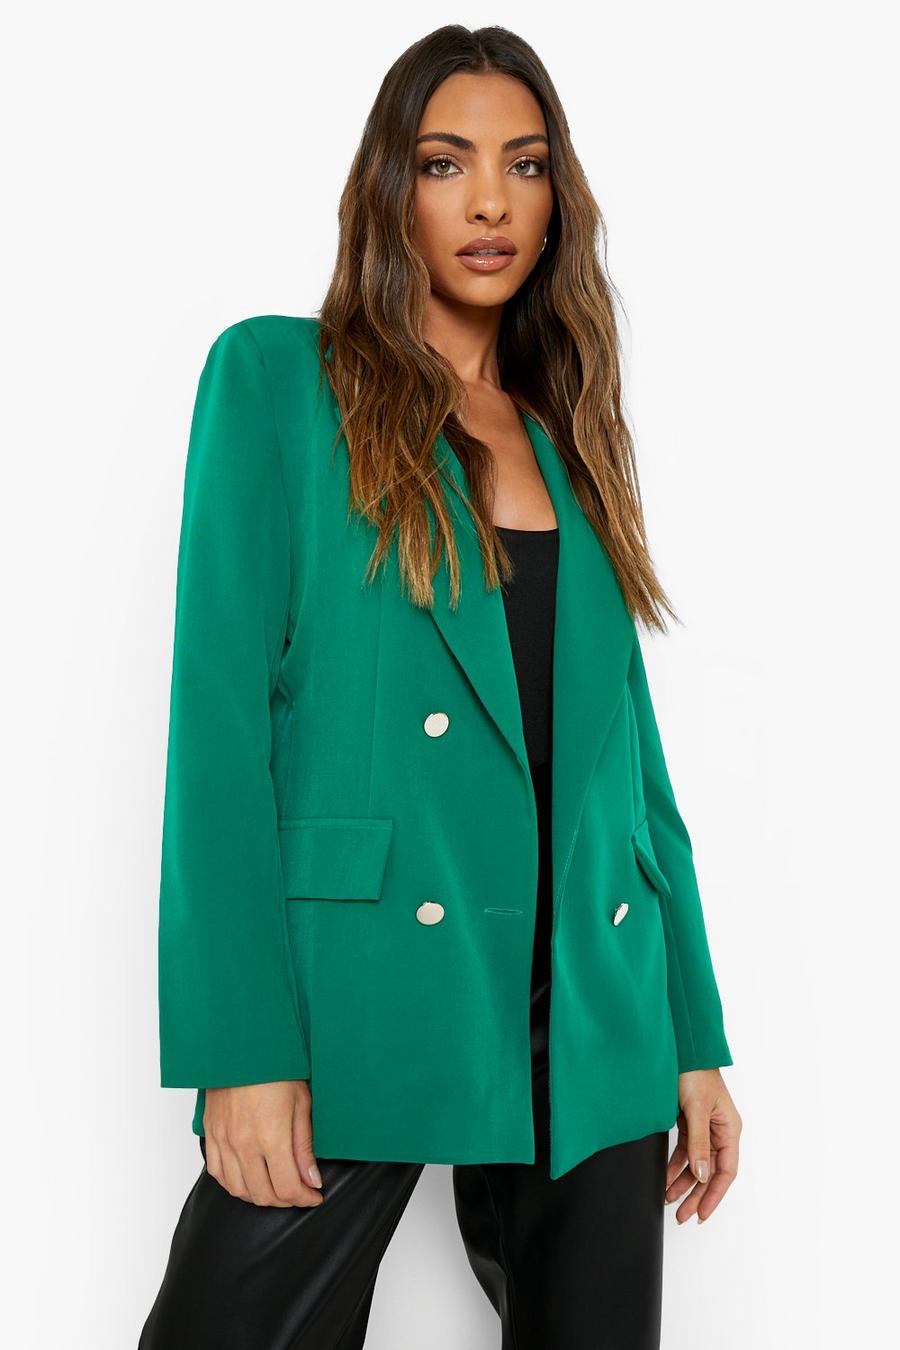 Disturb Productivity Endless Women's Double Breasted Tailored Military Blazer | Boohoo UK